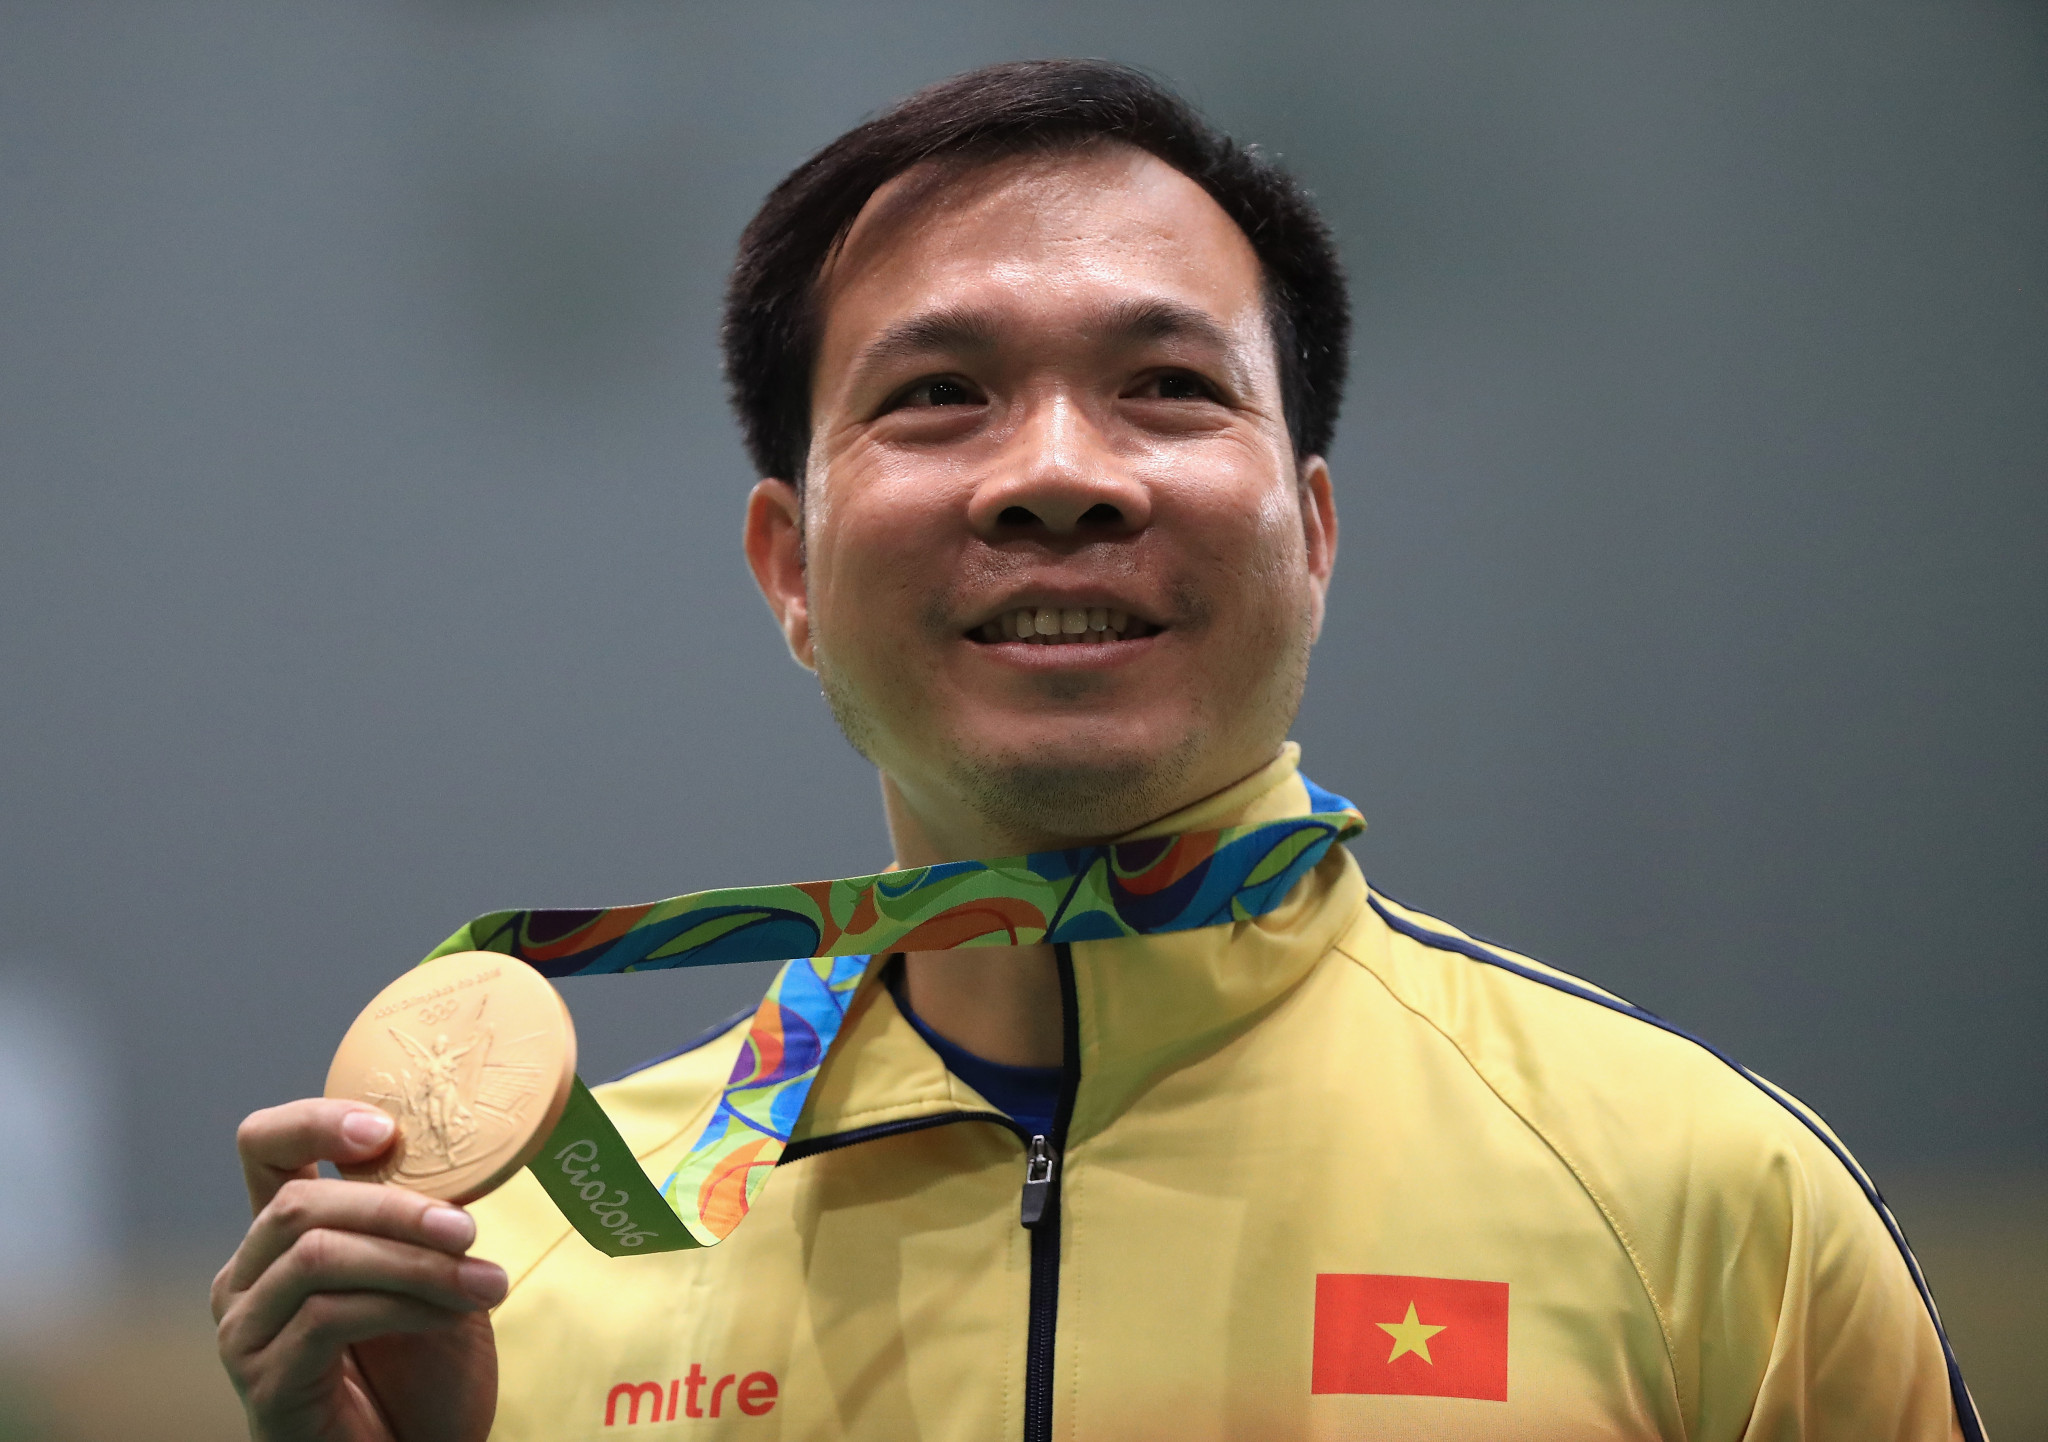 Hoàng Xuân Vinh became Vietnam's first Olympic gold medallist at Rio 2016 ©Getty Images